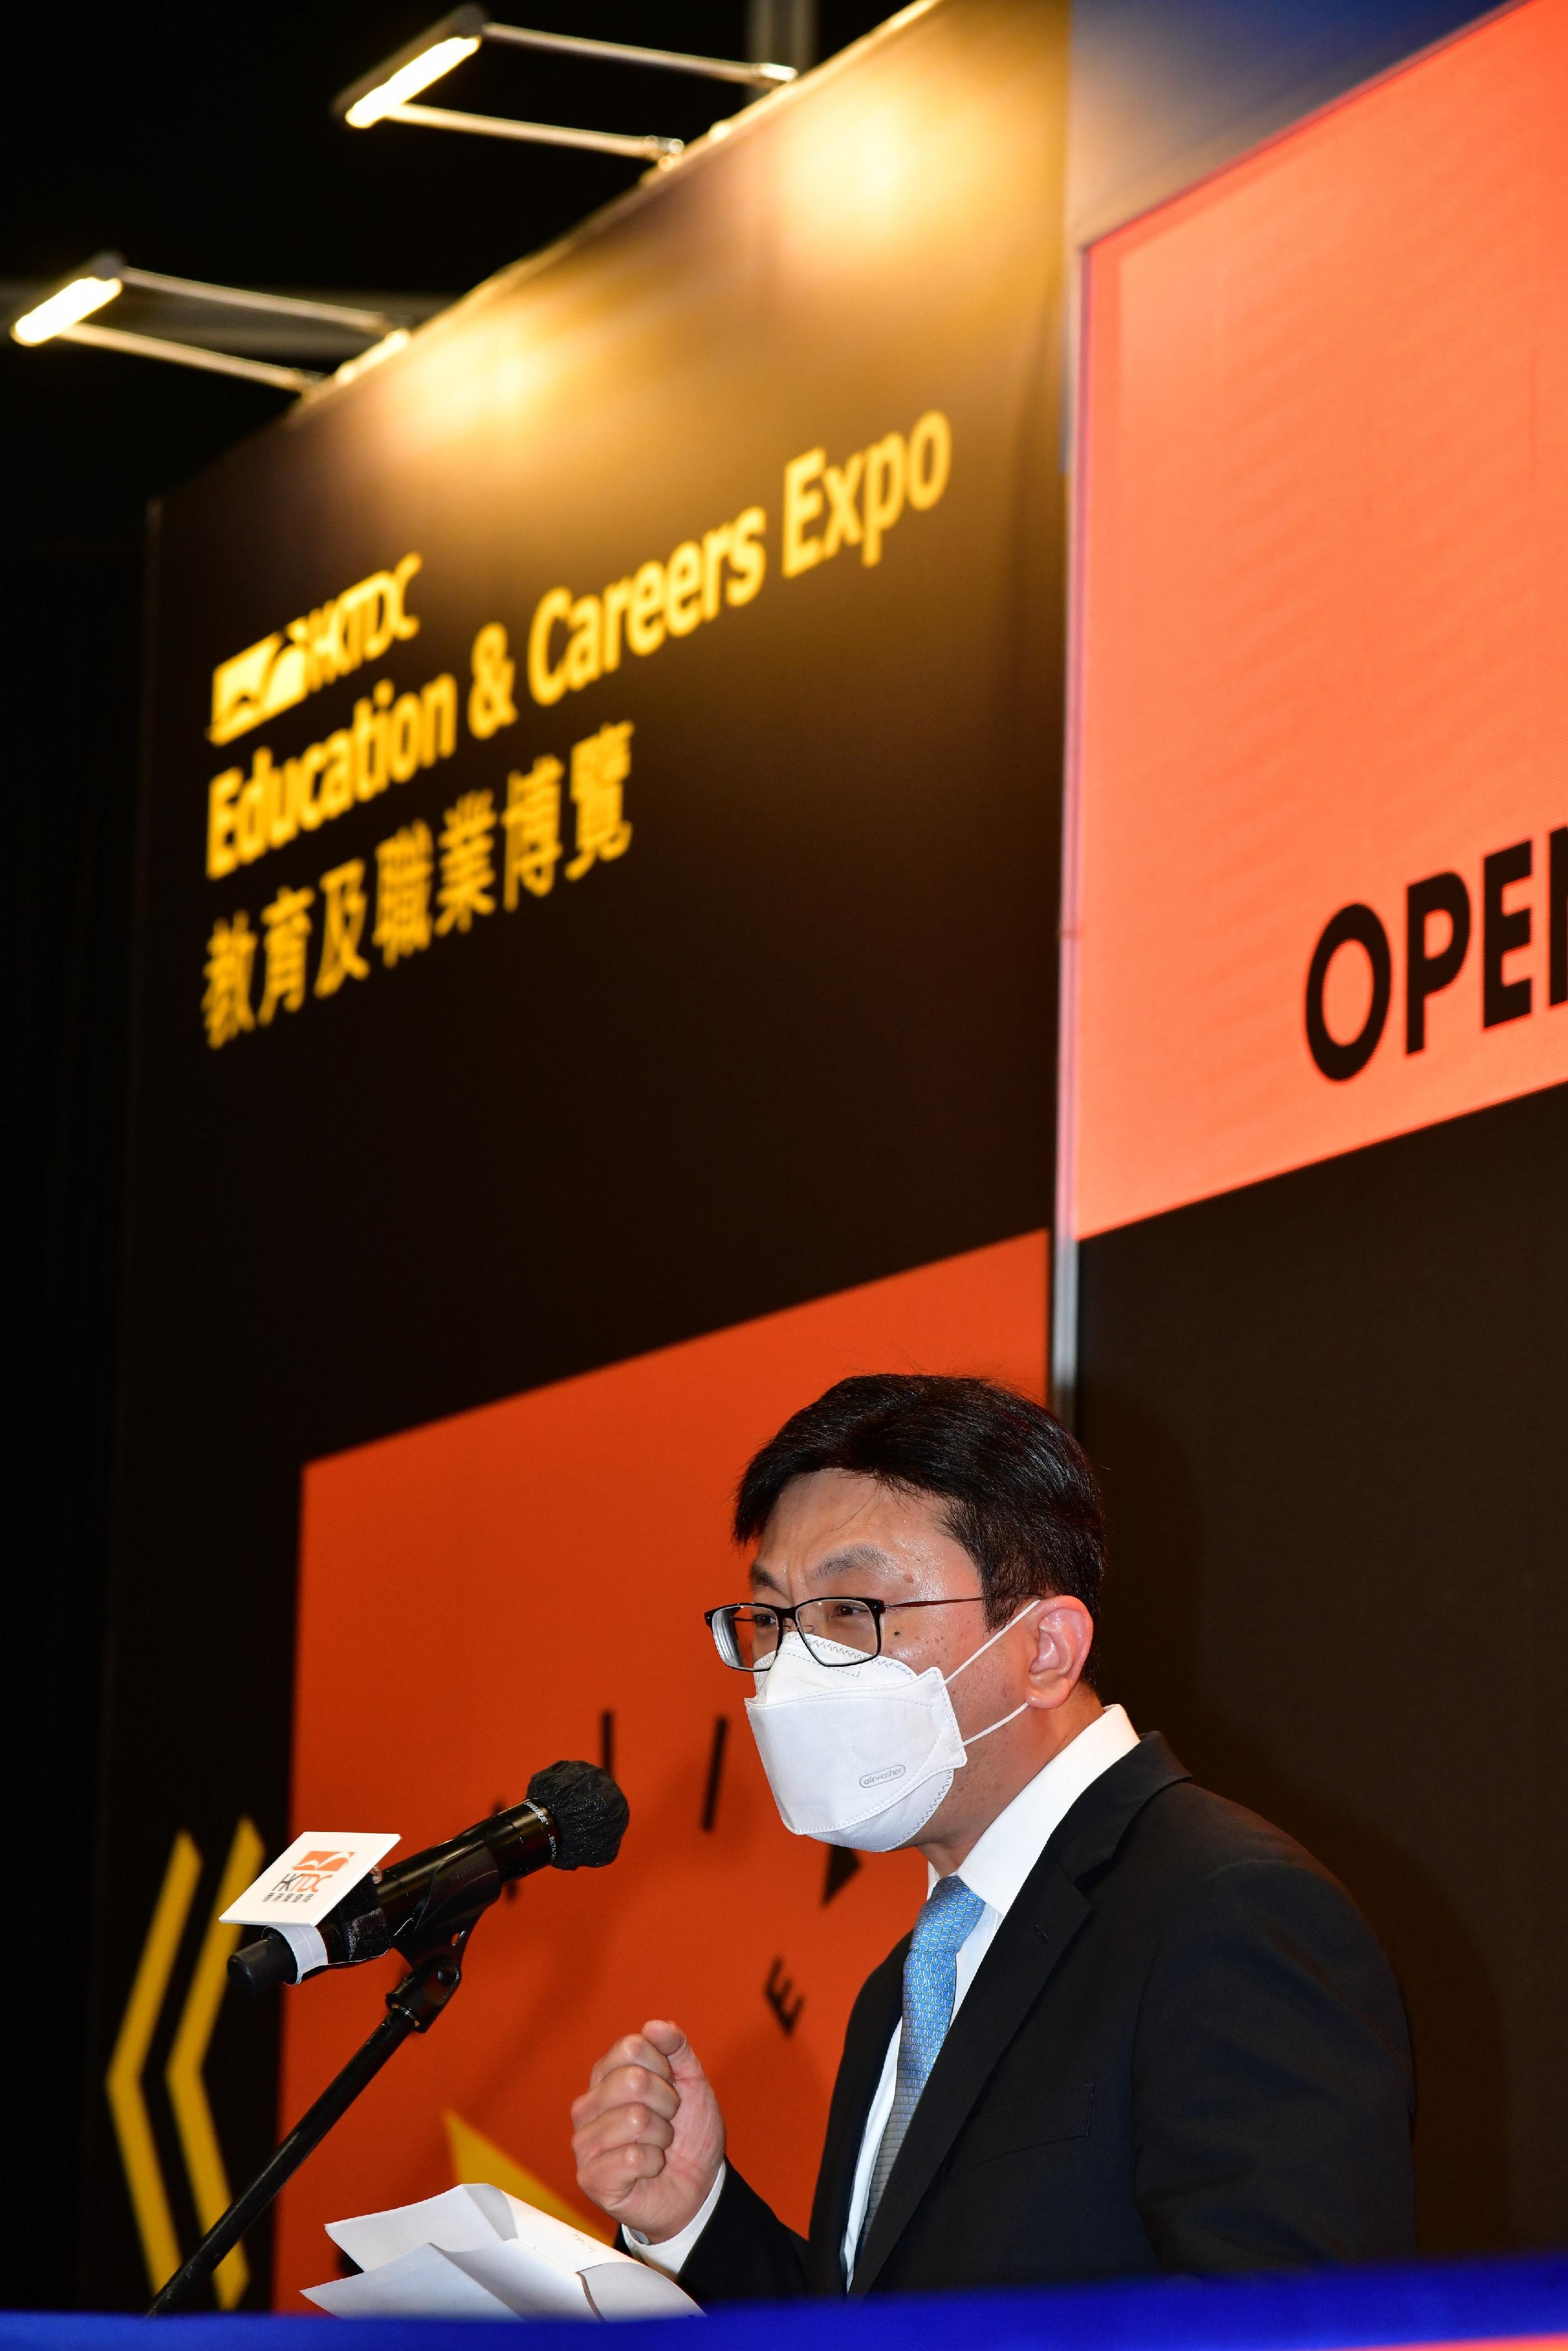 The Secretary for Labour and Welfare, Mr Chris Sun, officiated at the opening ceremony of the Hong Kong Trade Development Council Education & Careers Expo 2022 today (July 21). Photo shows Mr Sun speaking at the opening ceremony.